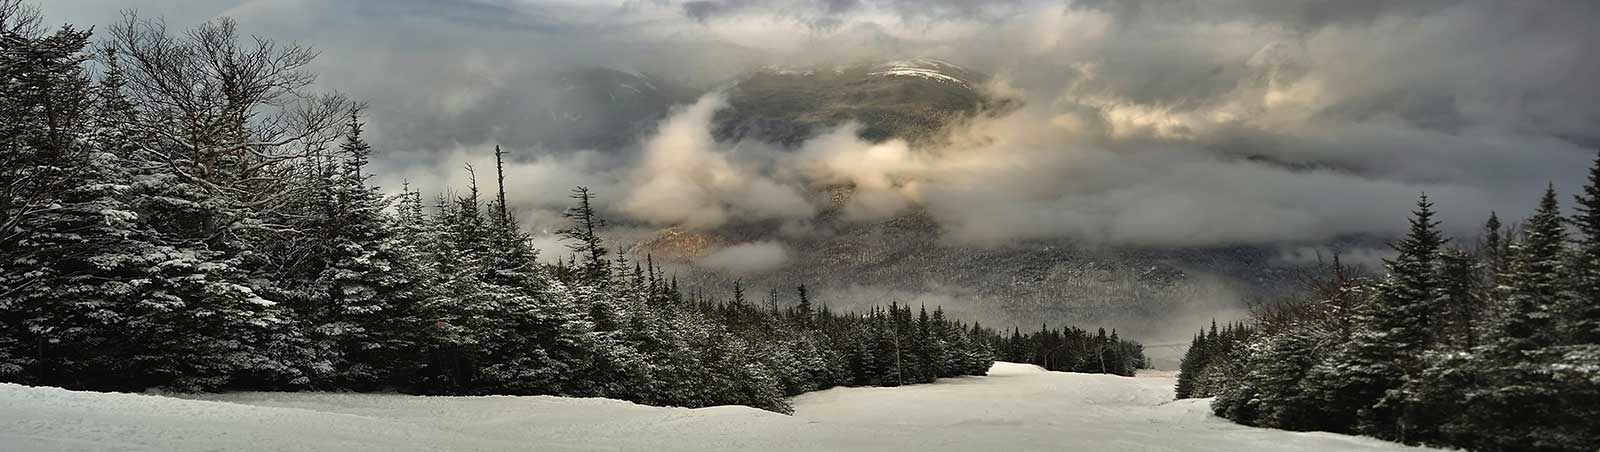 and Wildcat School Ski Trips, View from summit of Wildcat ski area in New Hampshire at early winter